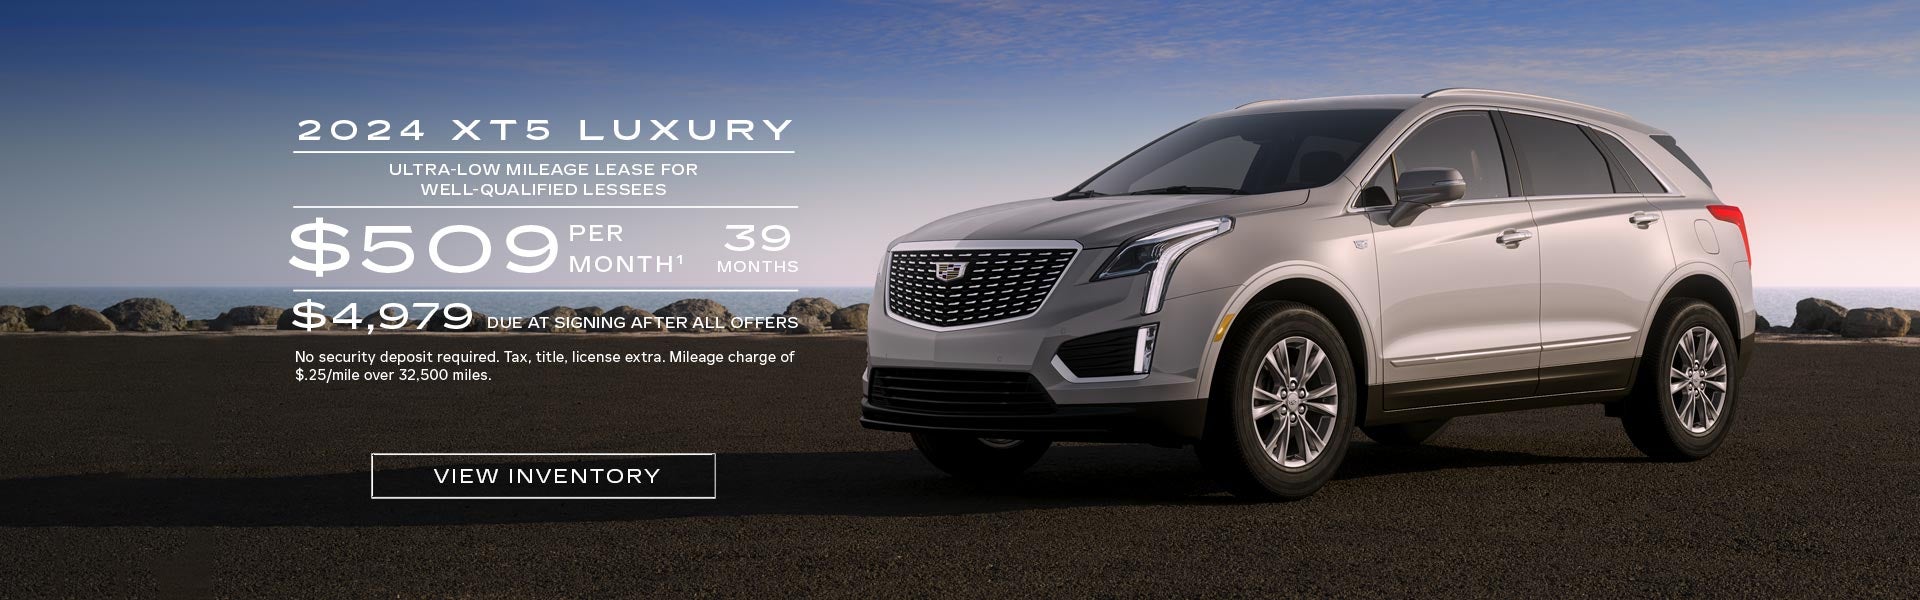 2024 XT5 Luxury. Ultra-low mileage lease for well-qualified Lessees. $509 per month. 39 months. $...